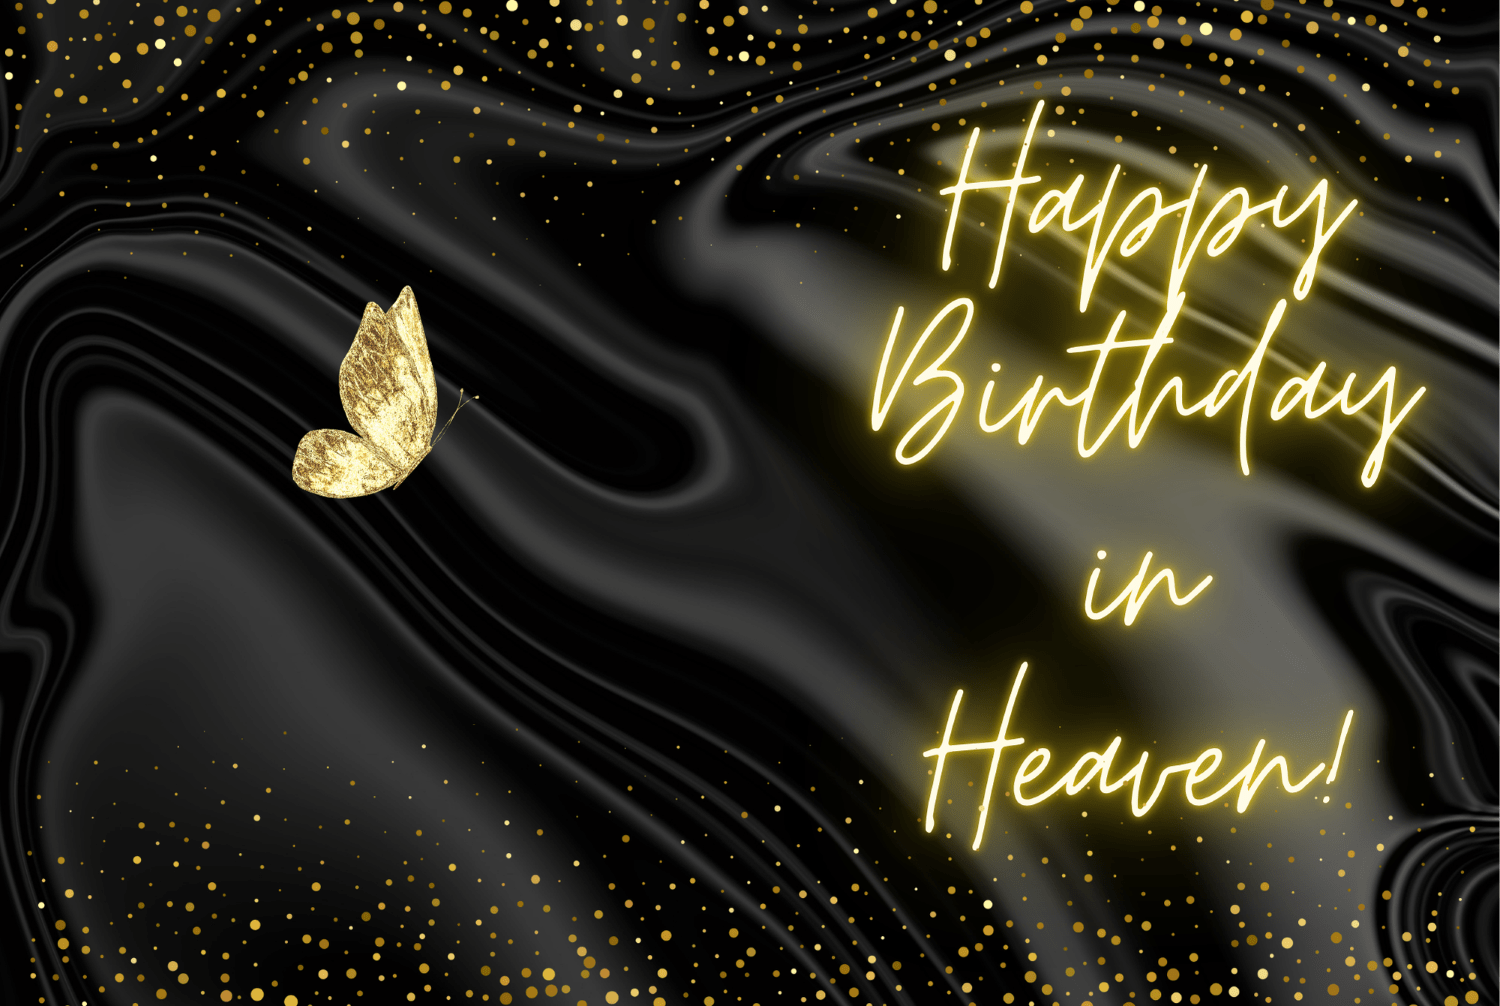 Happy Birthday in Heaven by P.B. Young